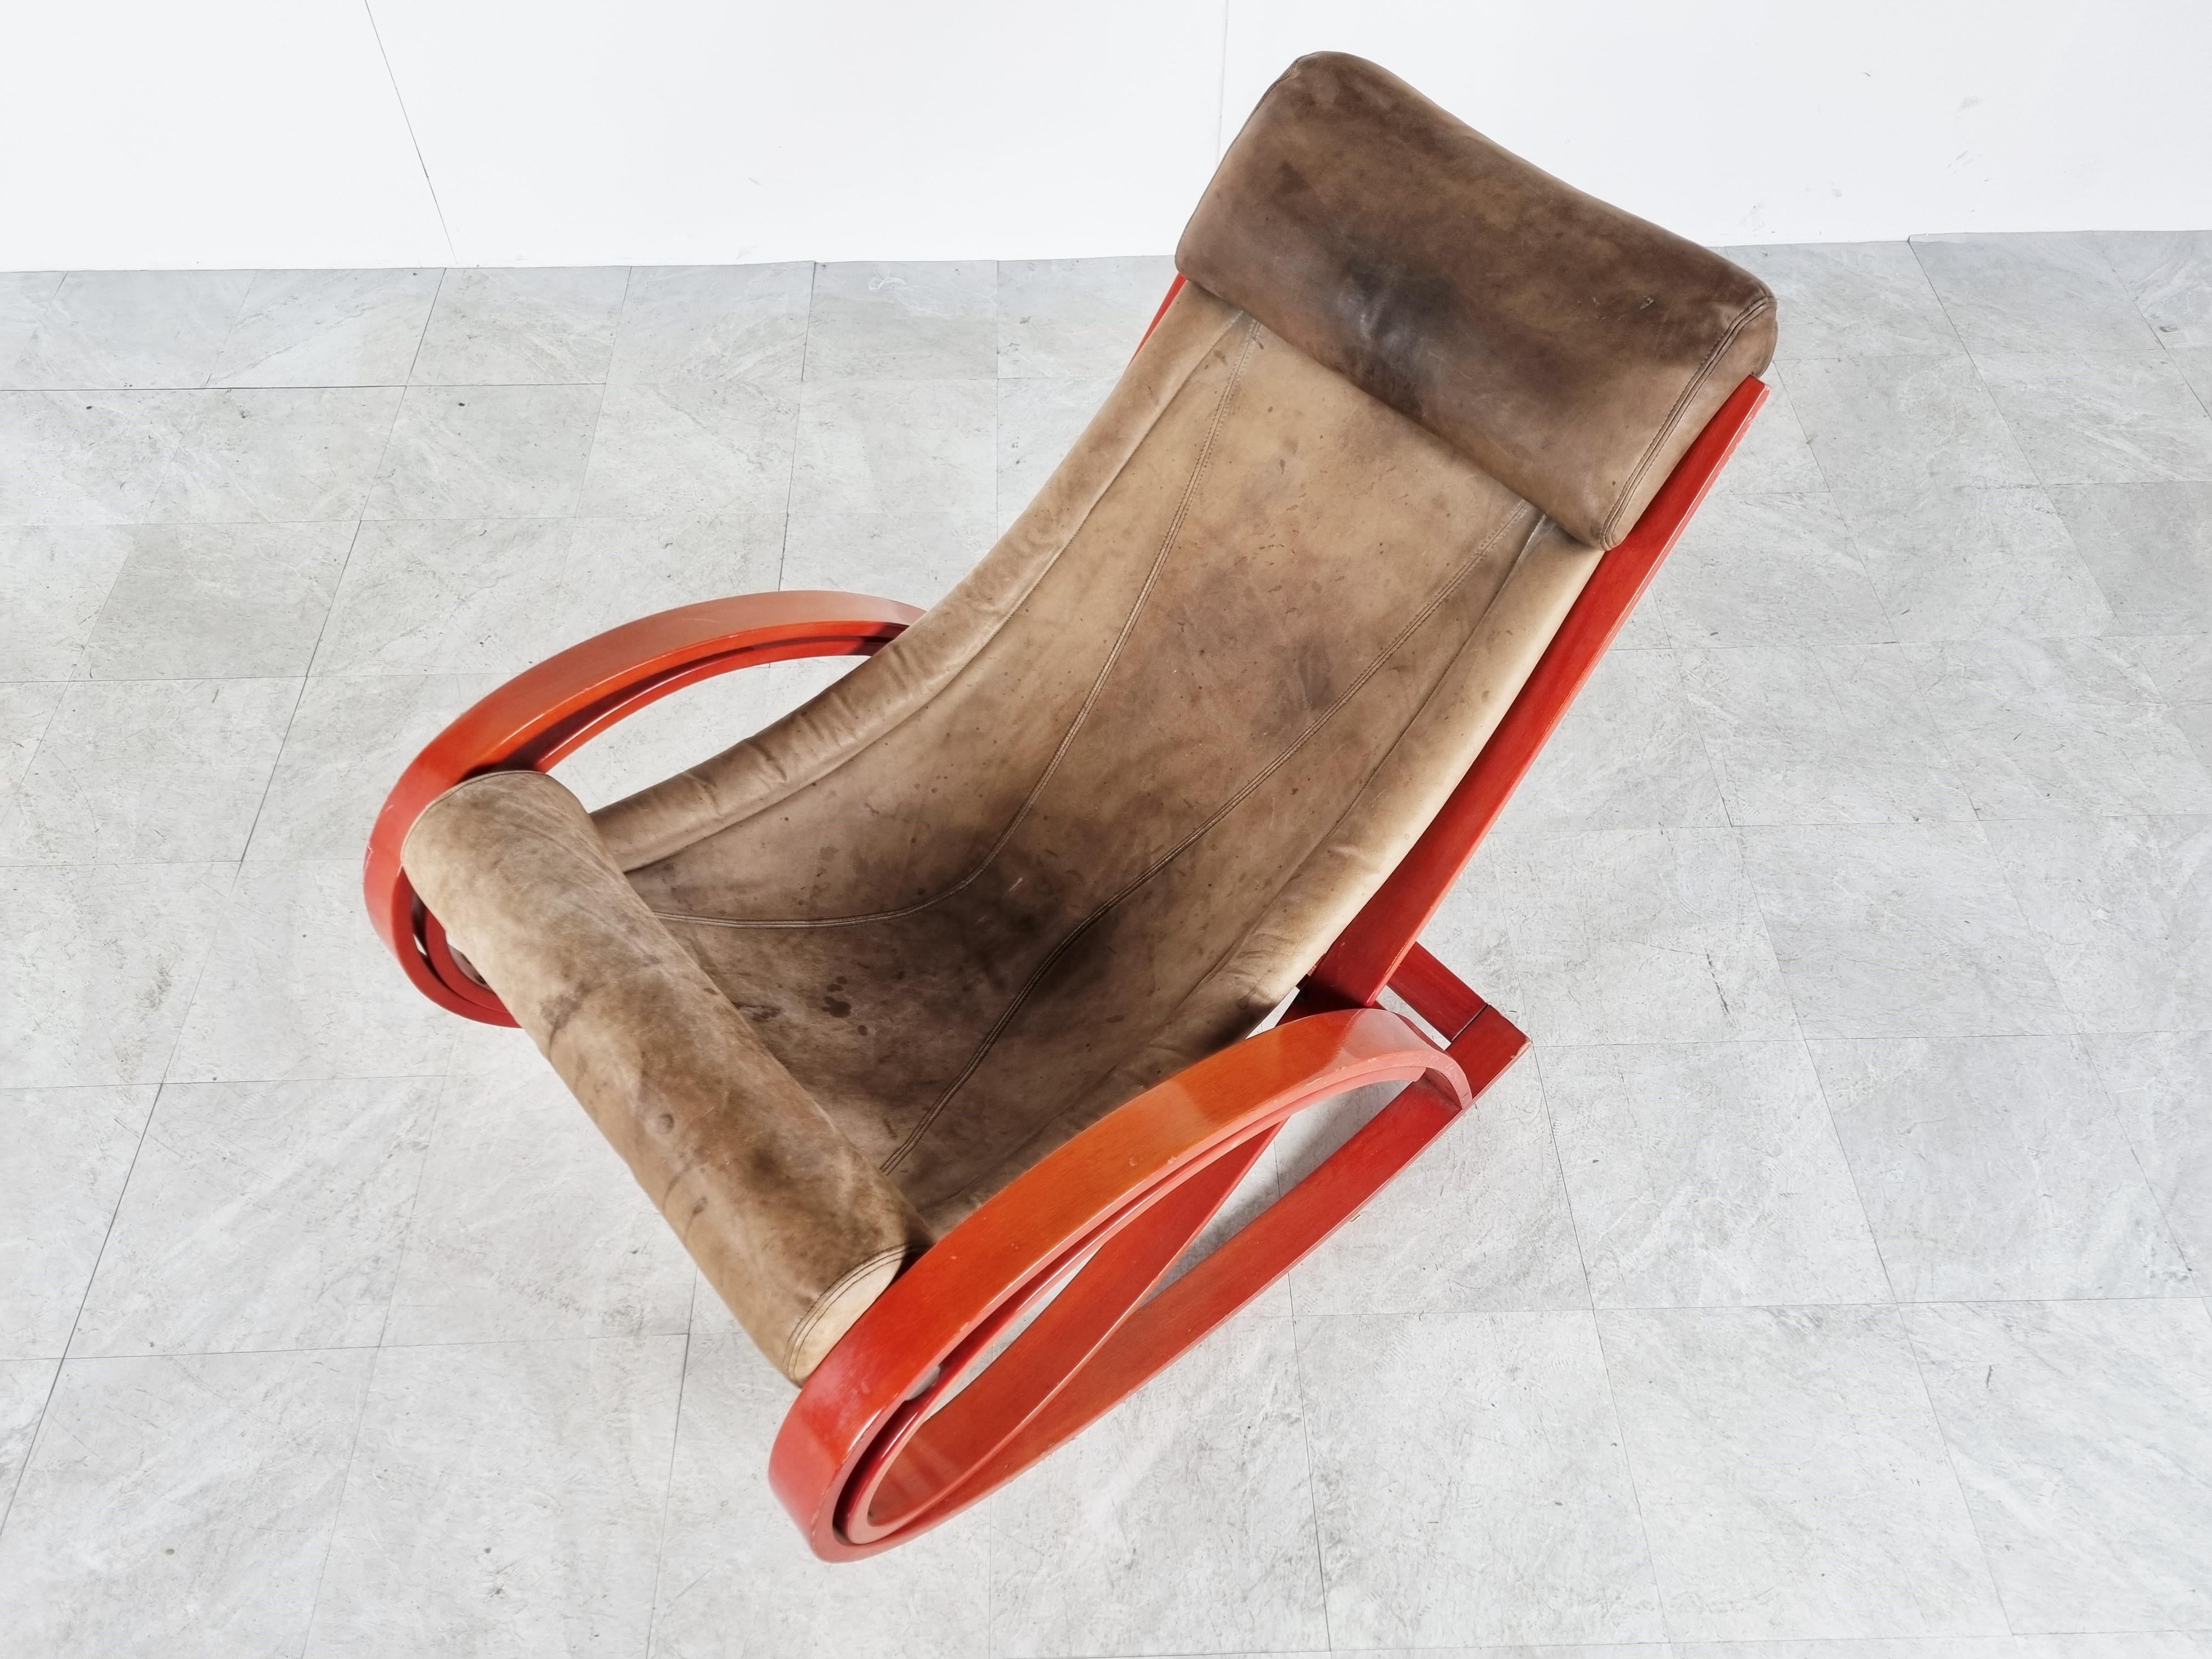 This great Sgarsul rocking chair was designed by Gae Aulenti in 1962 for Poltronova.

Consists of a red lacquered bentwood frame with nicely patinated brown leather seats/upholstery.

Good overall condition, strong leather, no